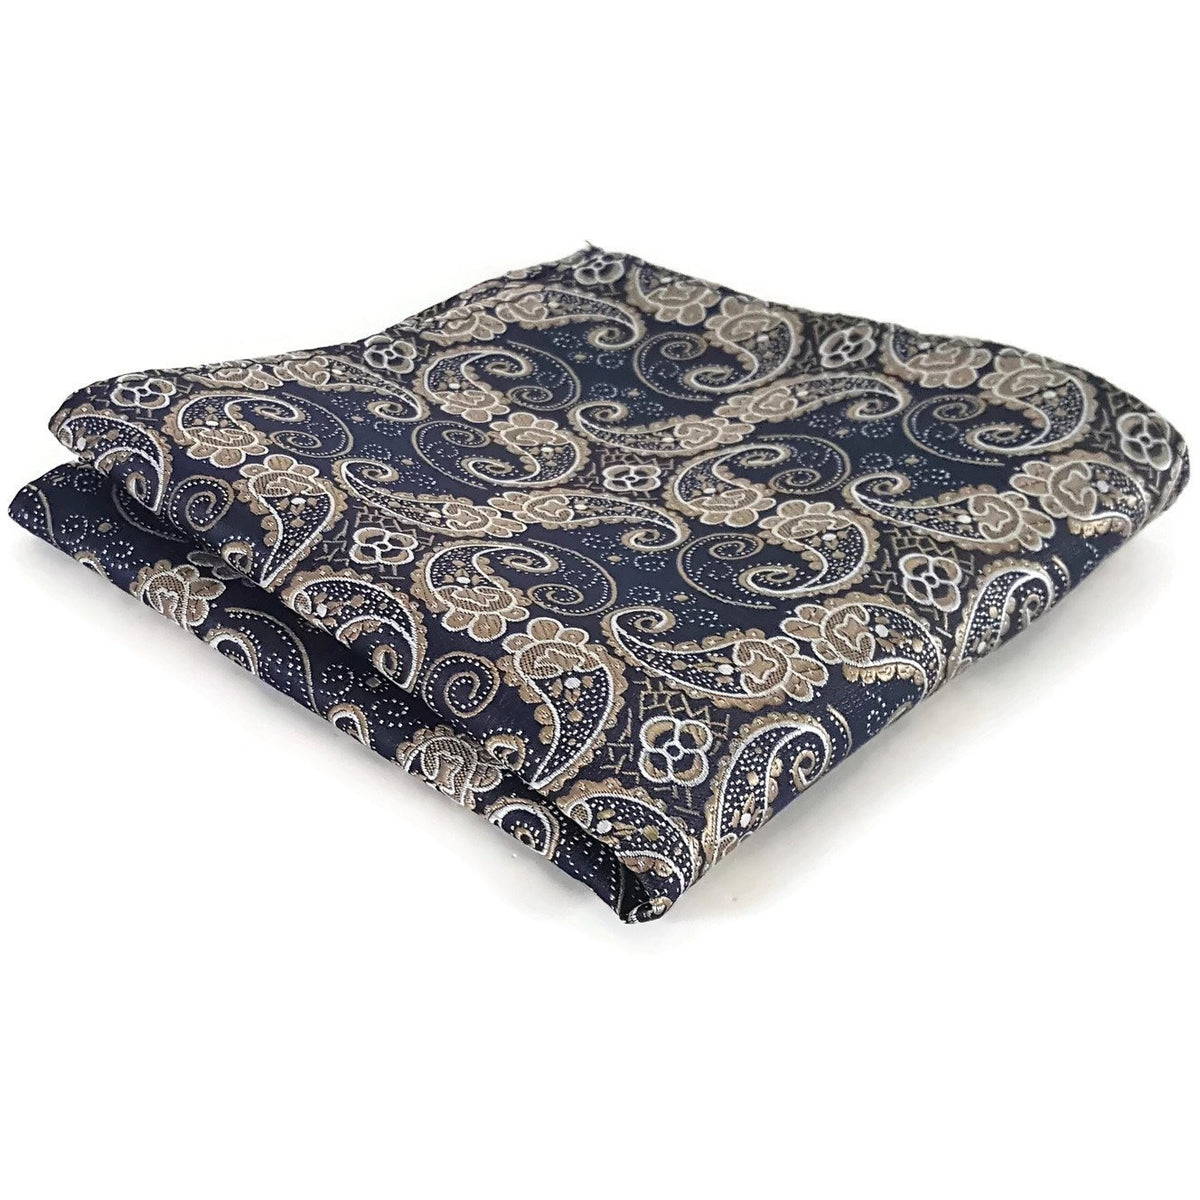 City Lights 100% Silk Jacquard Woven Navy Blue with Gold Paisley Pocket ...